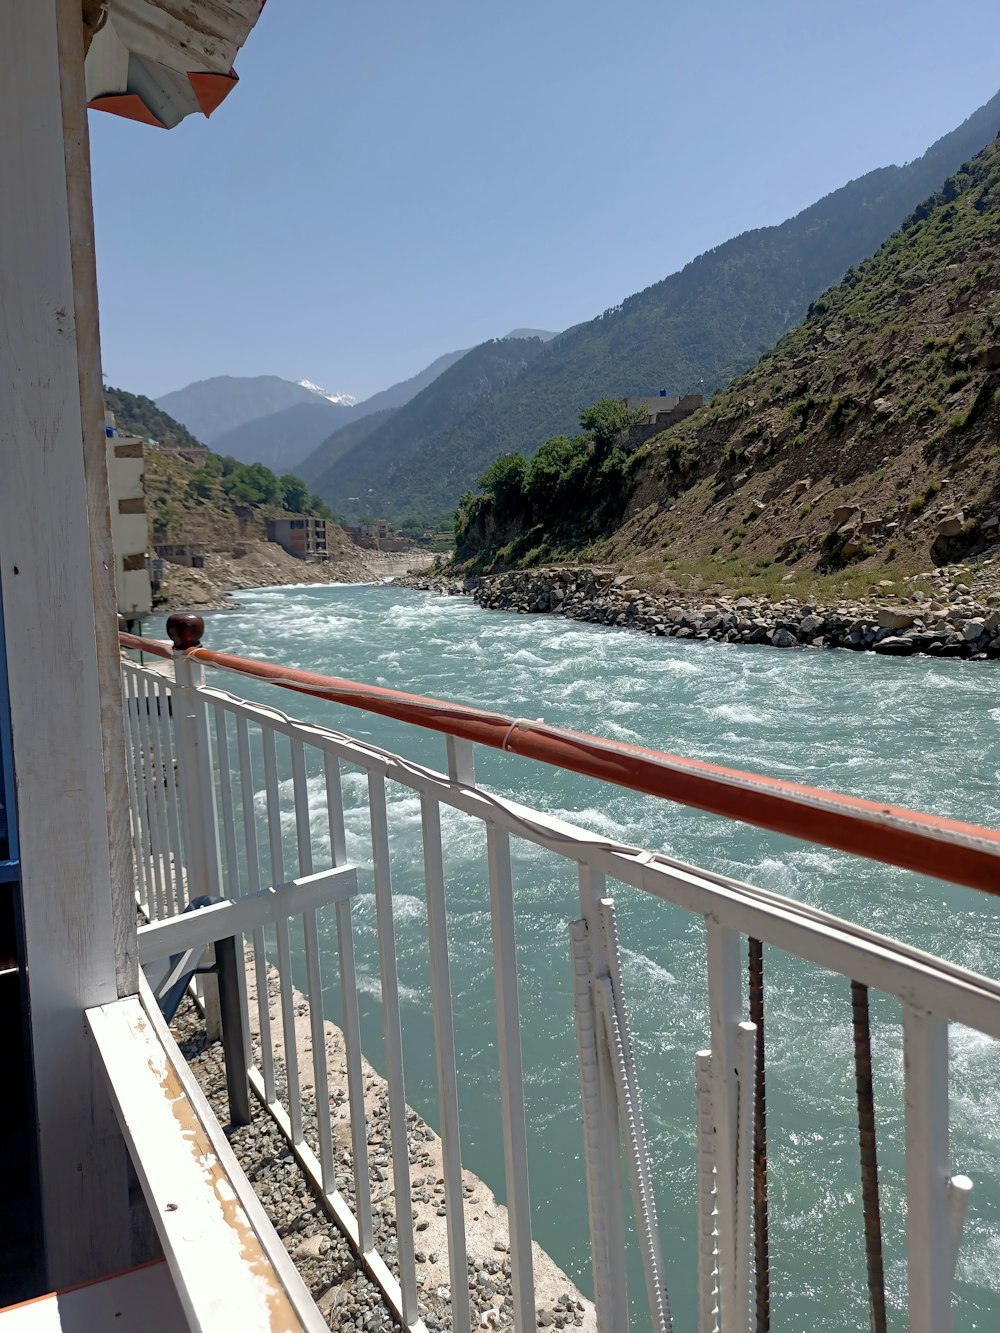 a balcony overlooking a river with mountains in the background